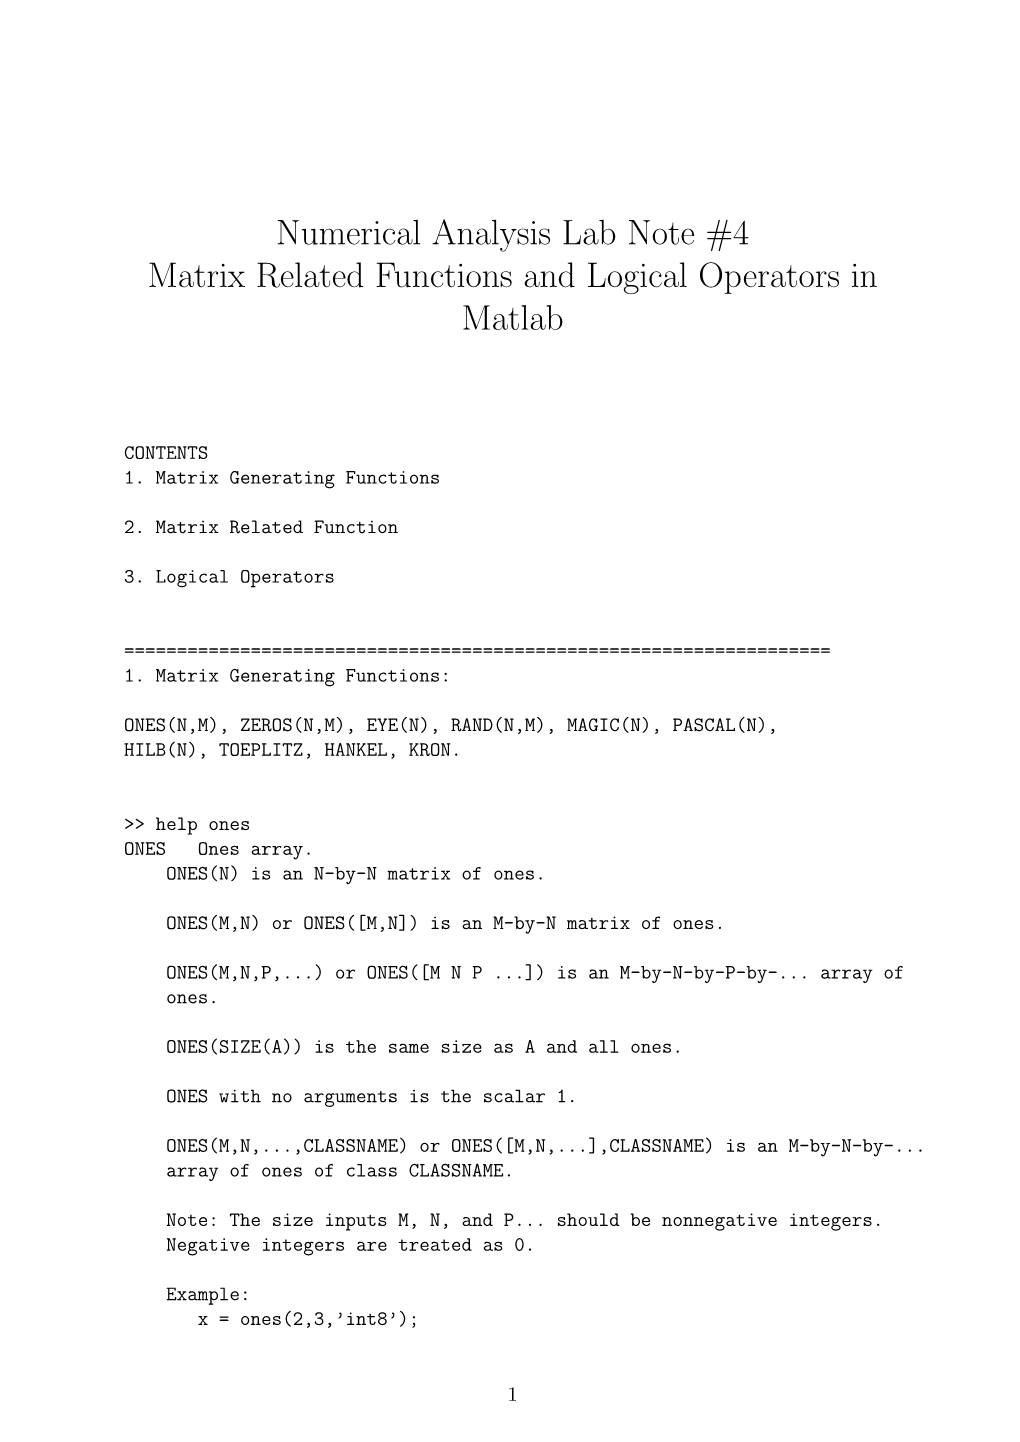 Numerical Analysis Lab Note #4 Matrix Related Functions and Logical Operators in Matlab